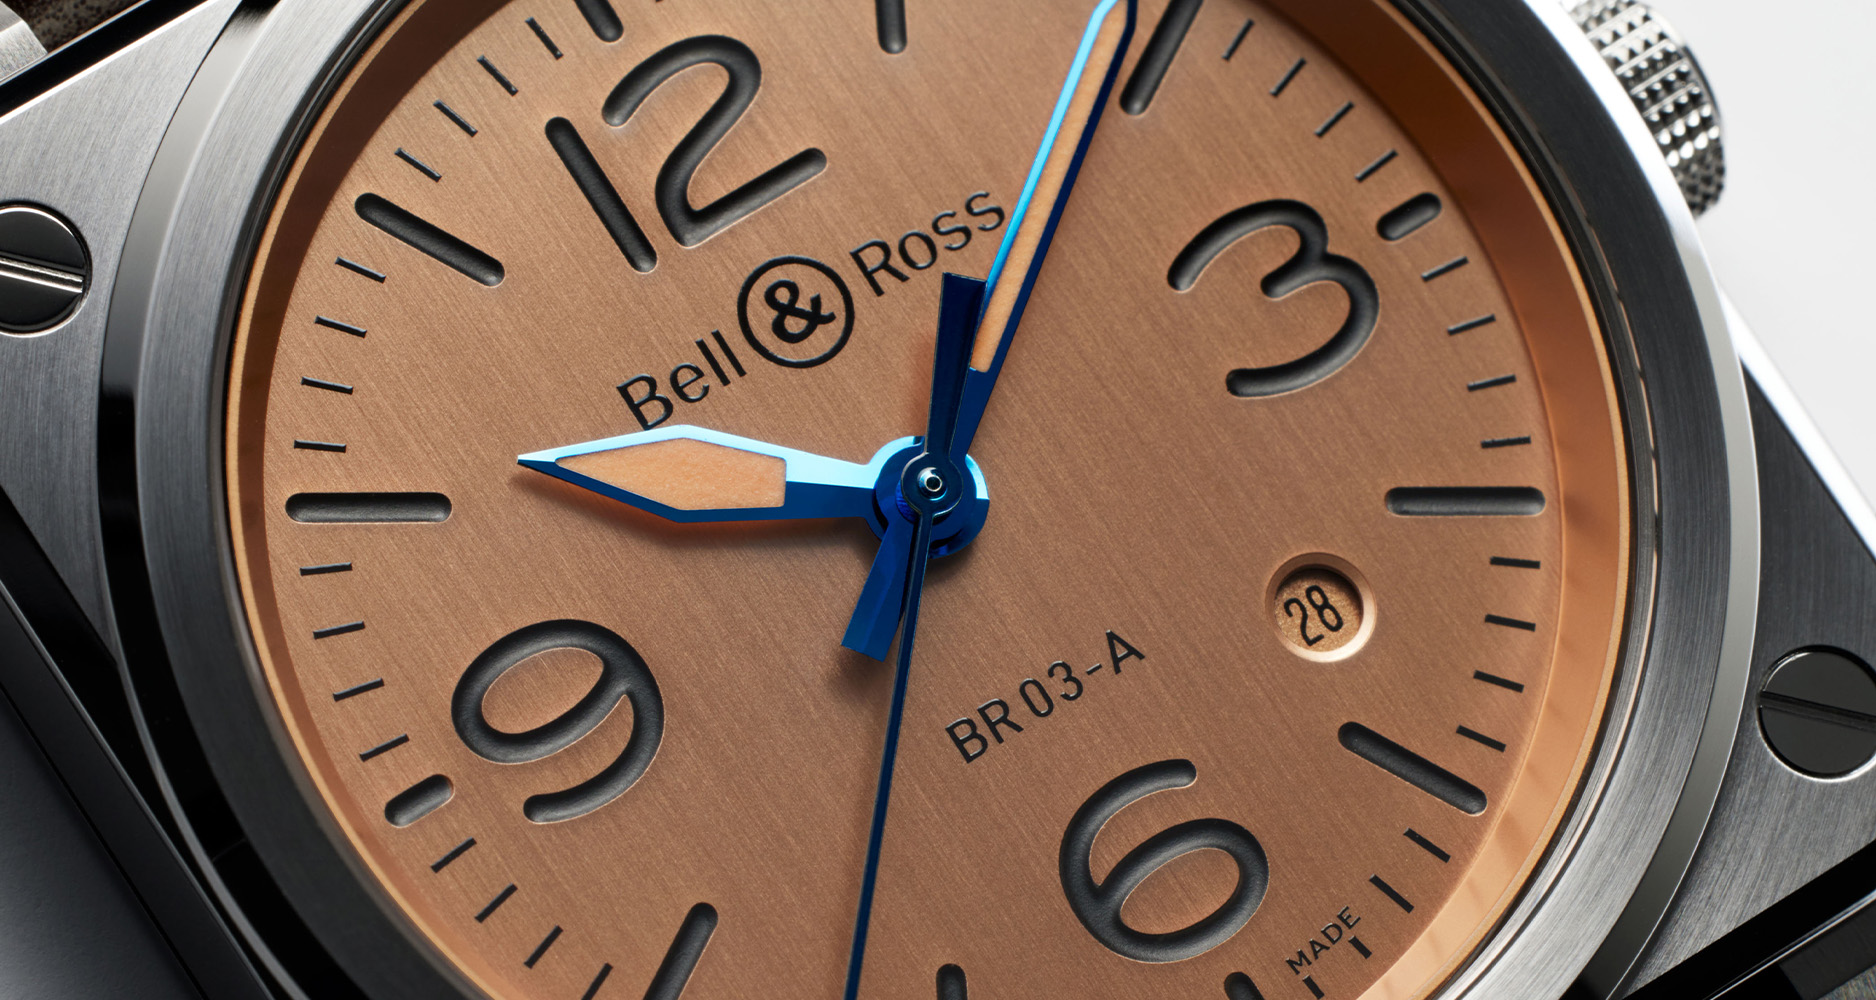 The Bell & Ross BR 03-A in stainless steel case with copper dial.